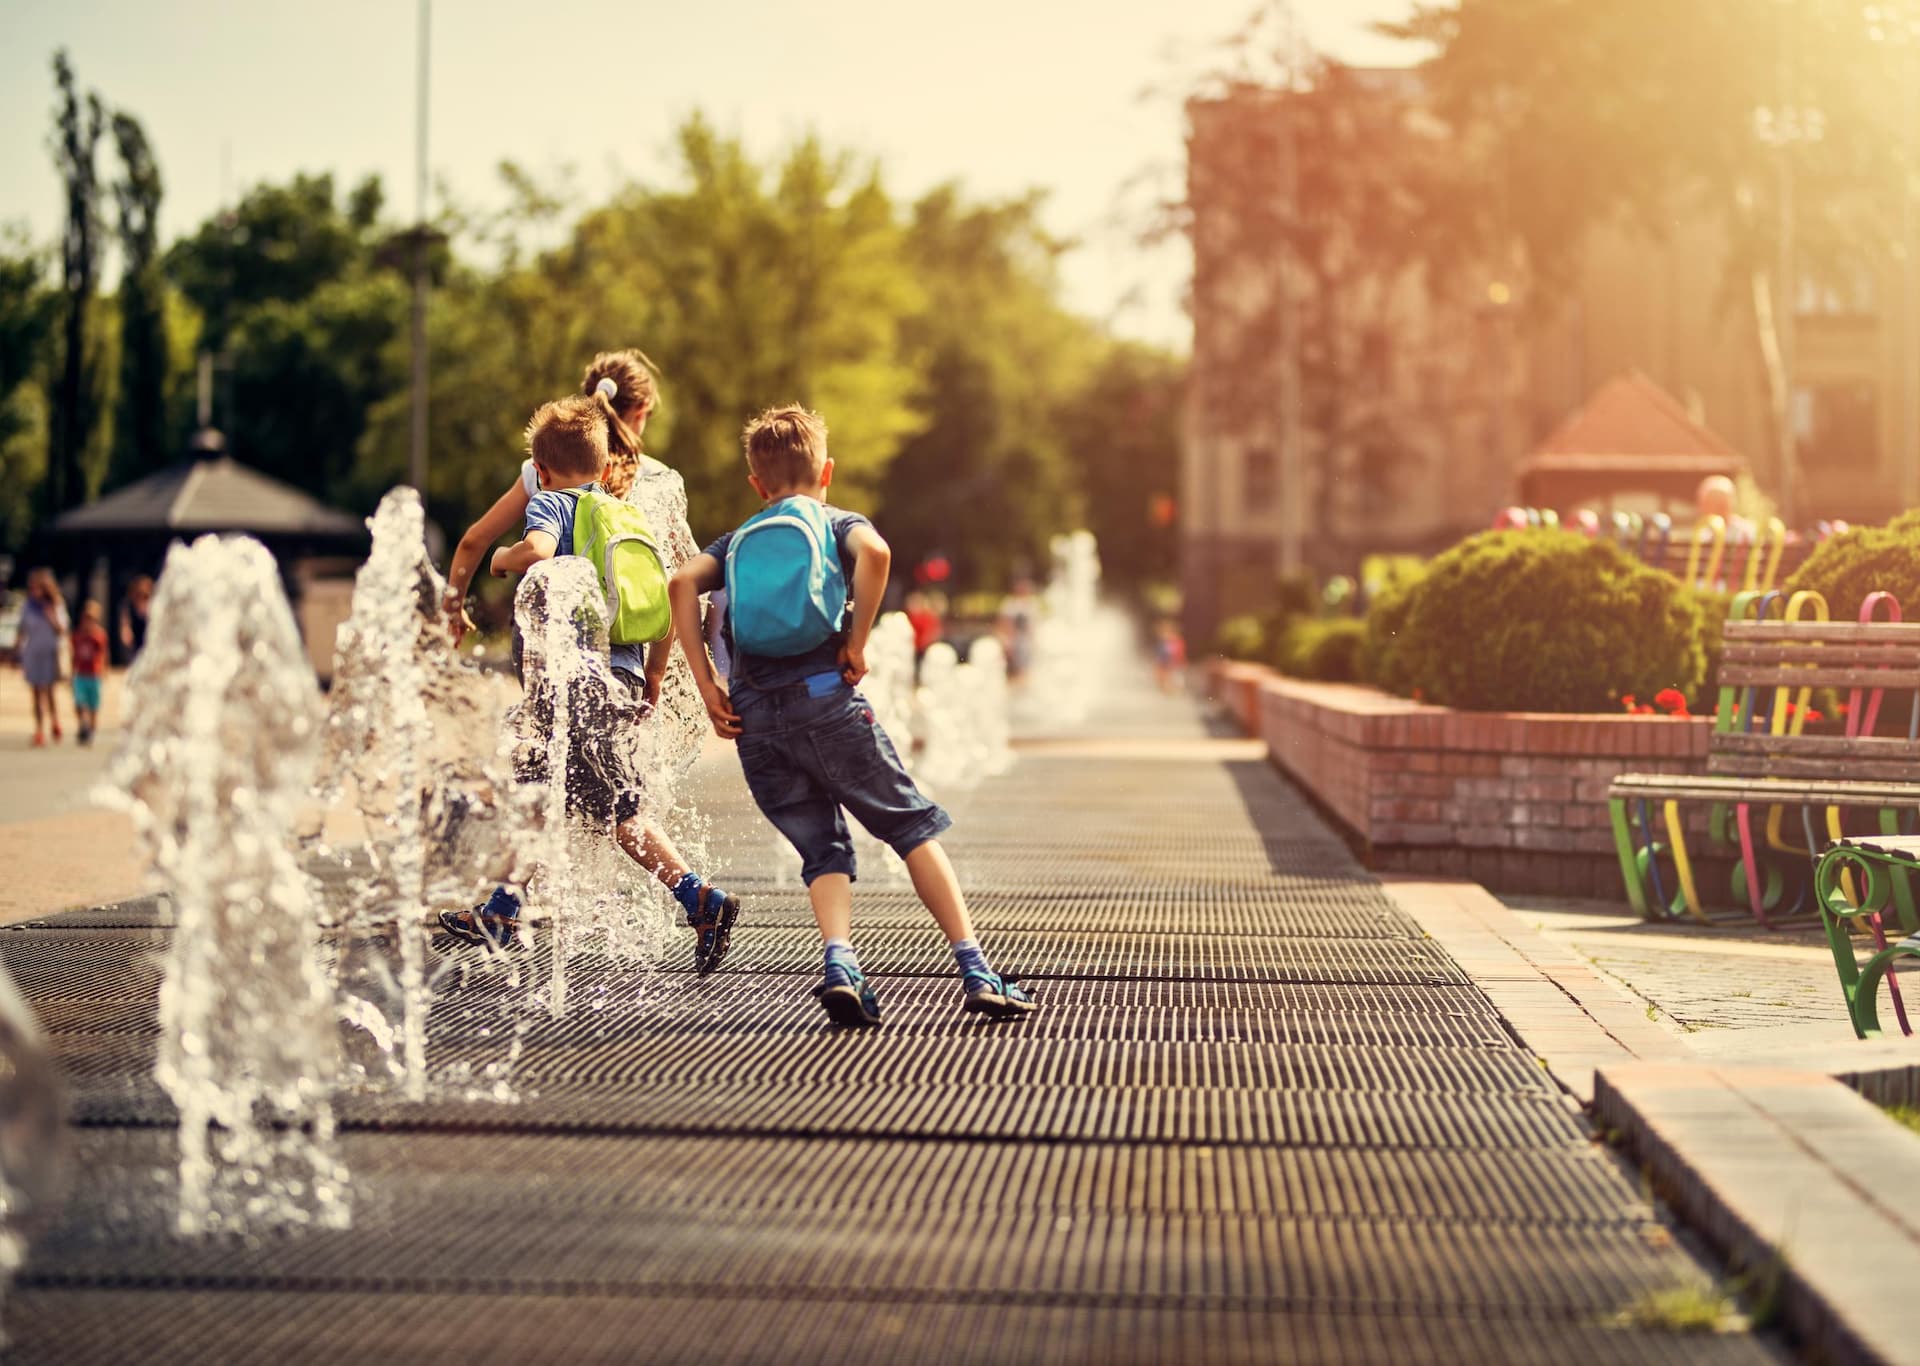 Hot summer day in the city. School children are having fun playing in the city fountains after school.